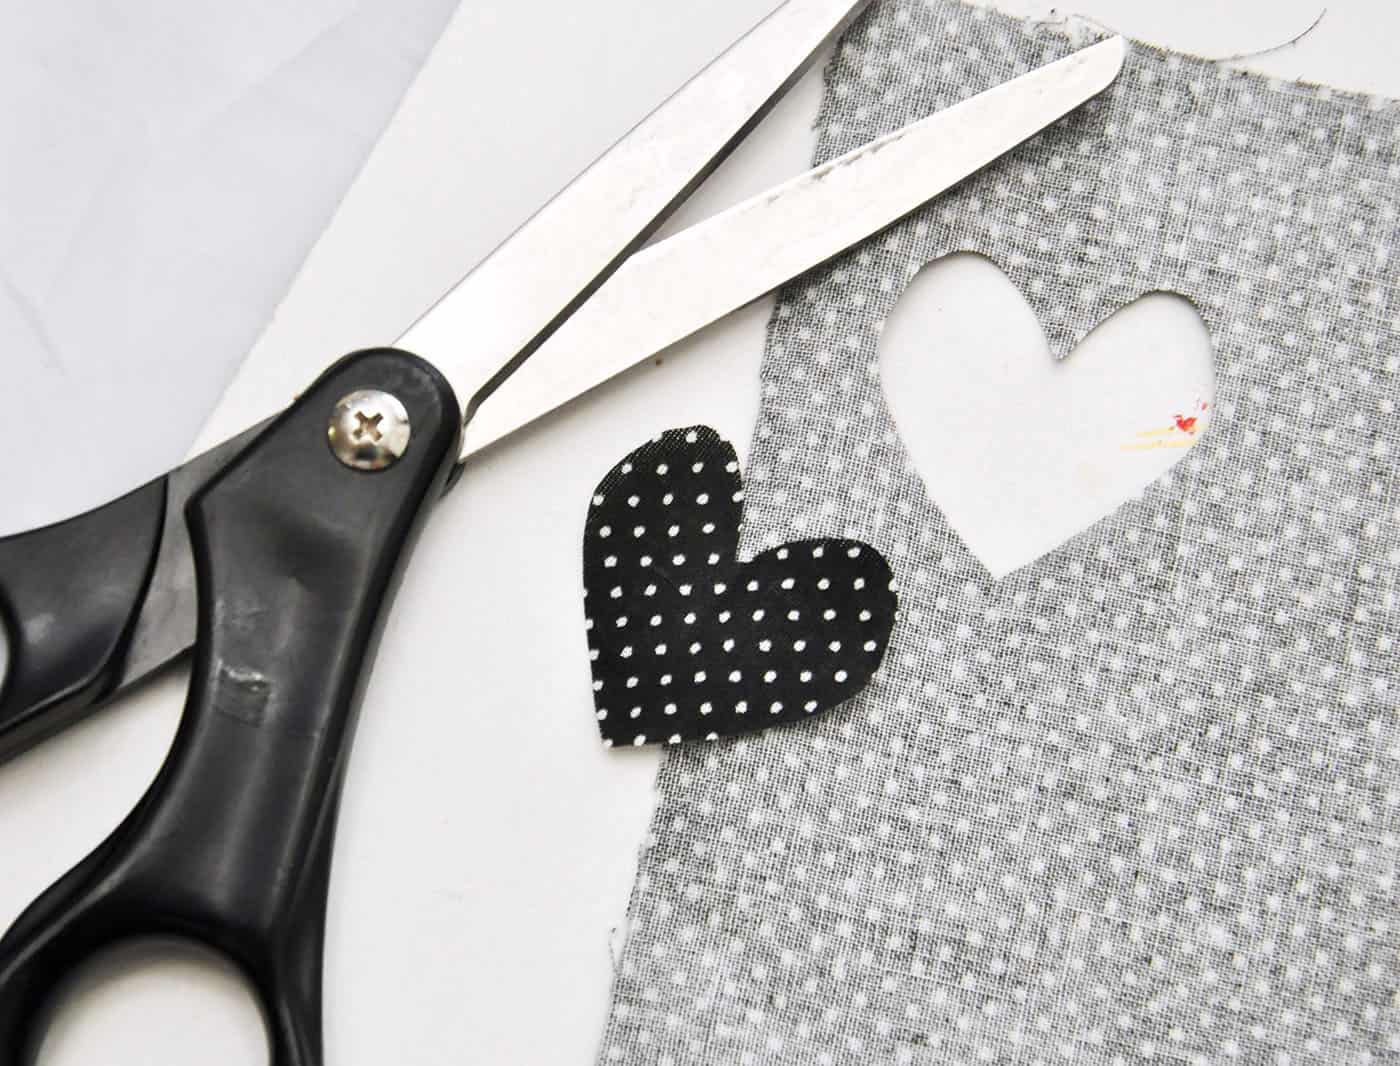 Heart cut out of black fabric with white polka dots using black handled scissors